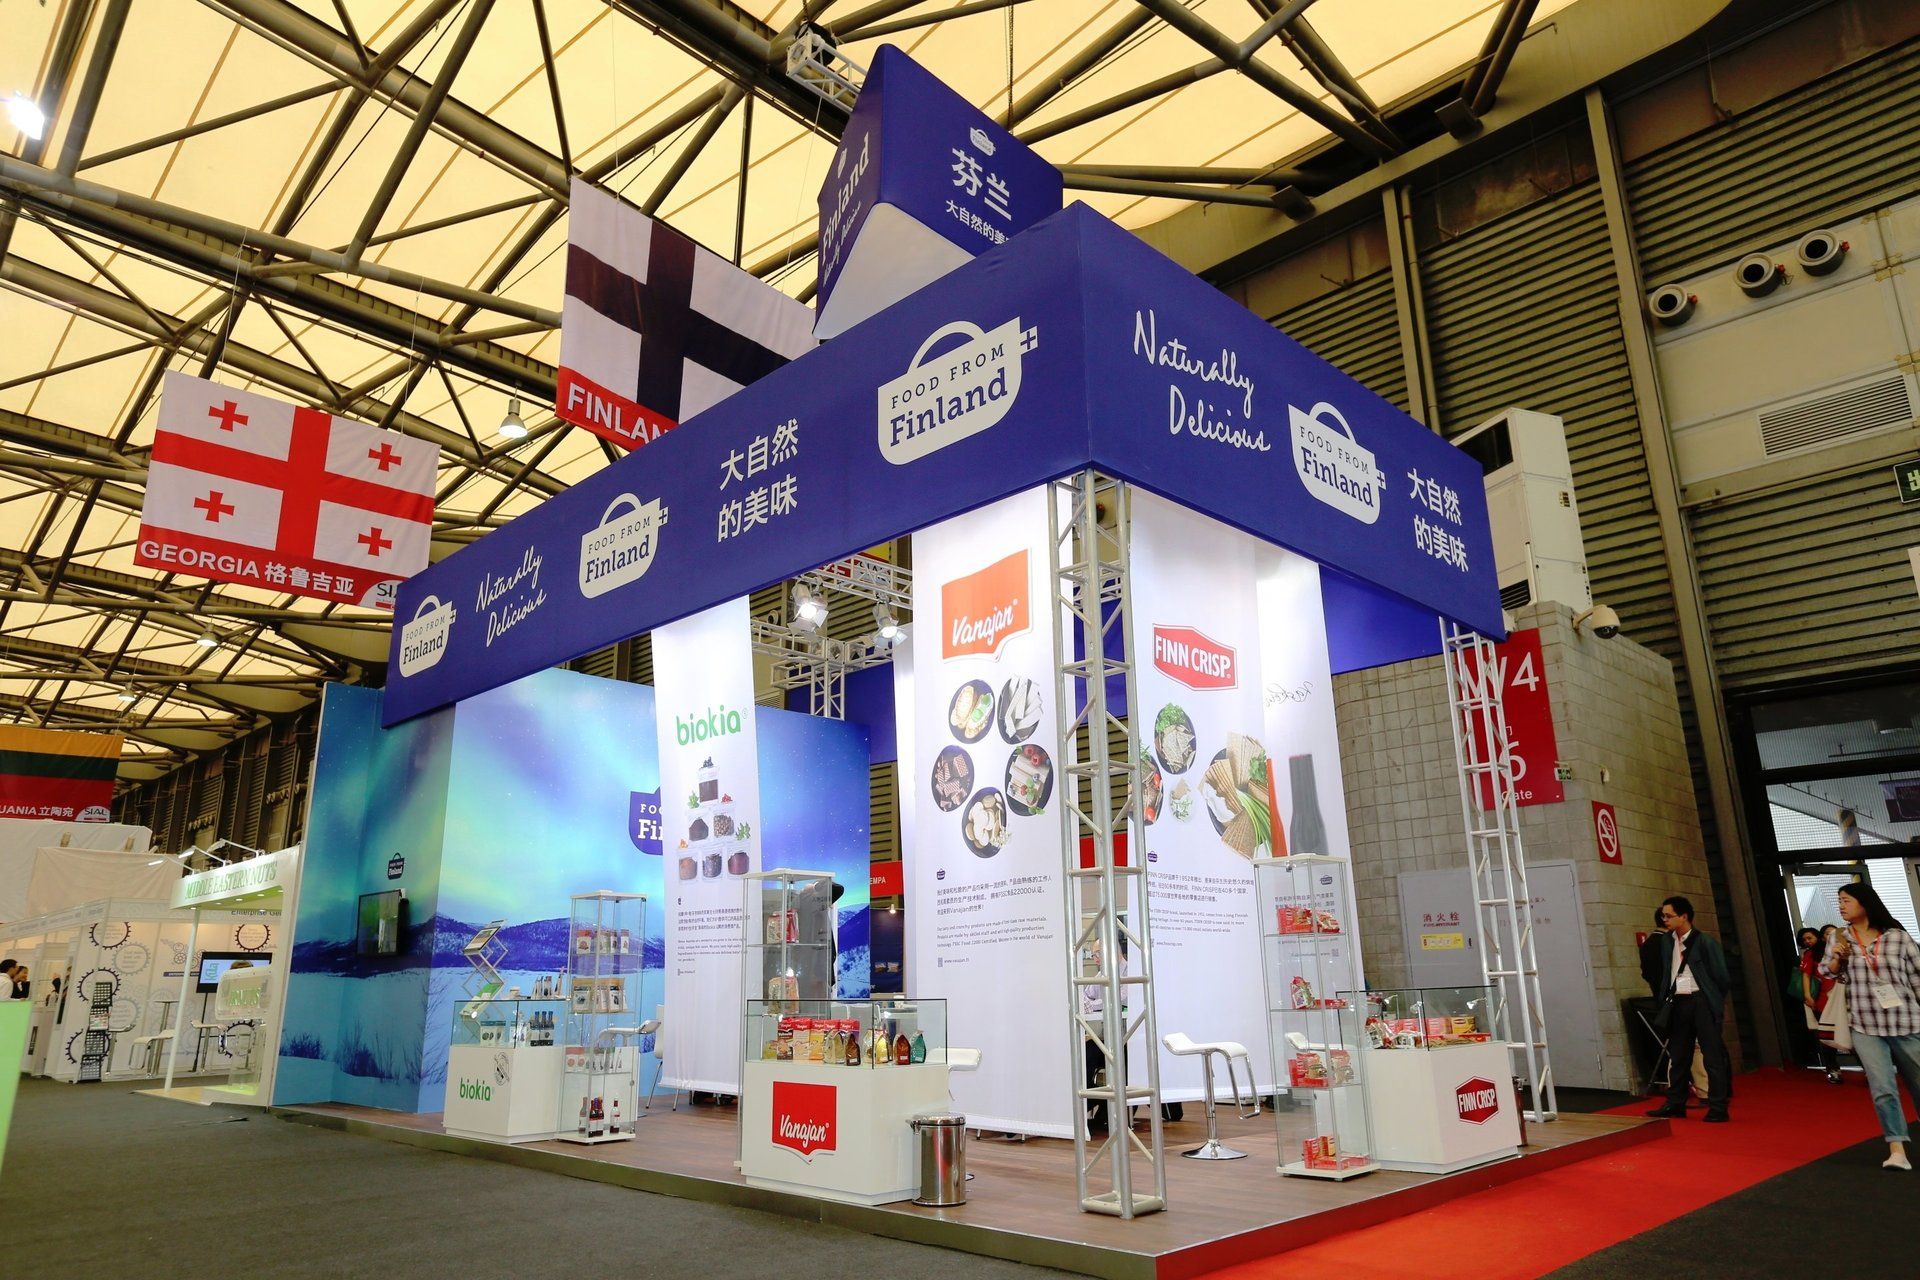 Finland Pavilion @ SIAL China 2015. Booth designed and built by Essential Global Fairs.